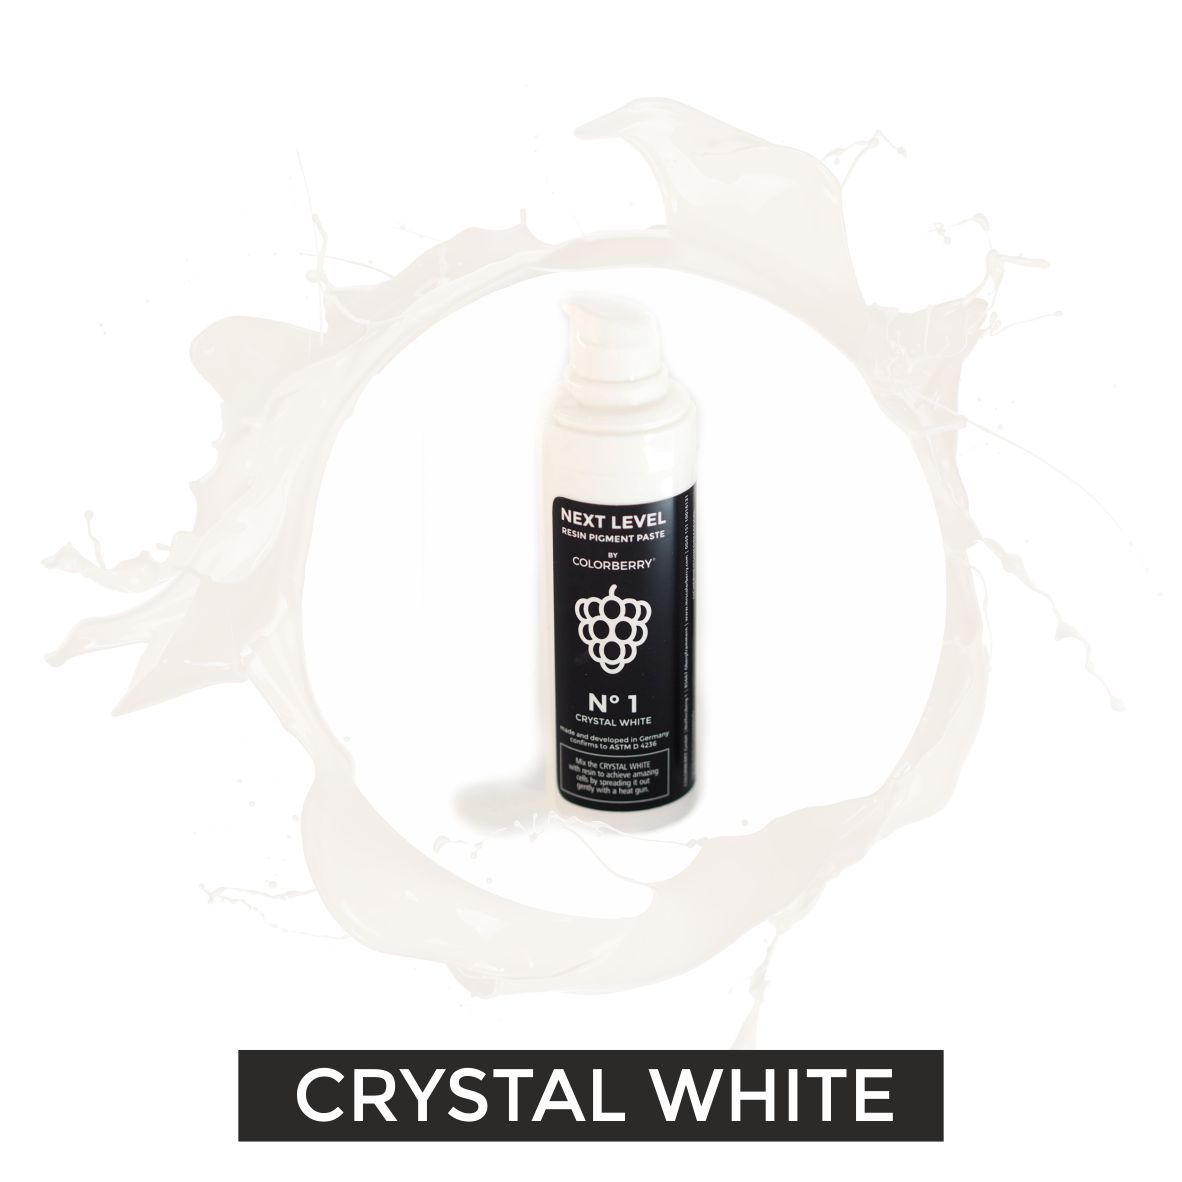 CRYSTAL WHITE PASTE - perfect cells and waves for resin art - 30 ml